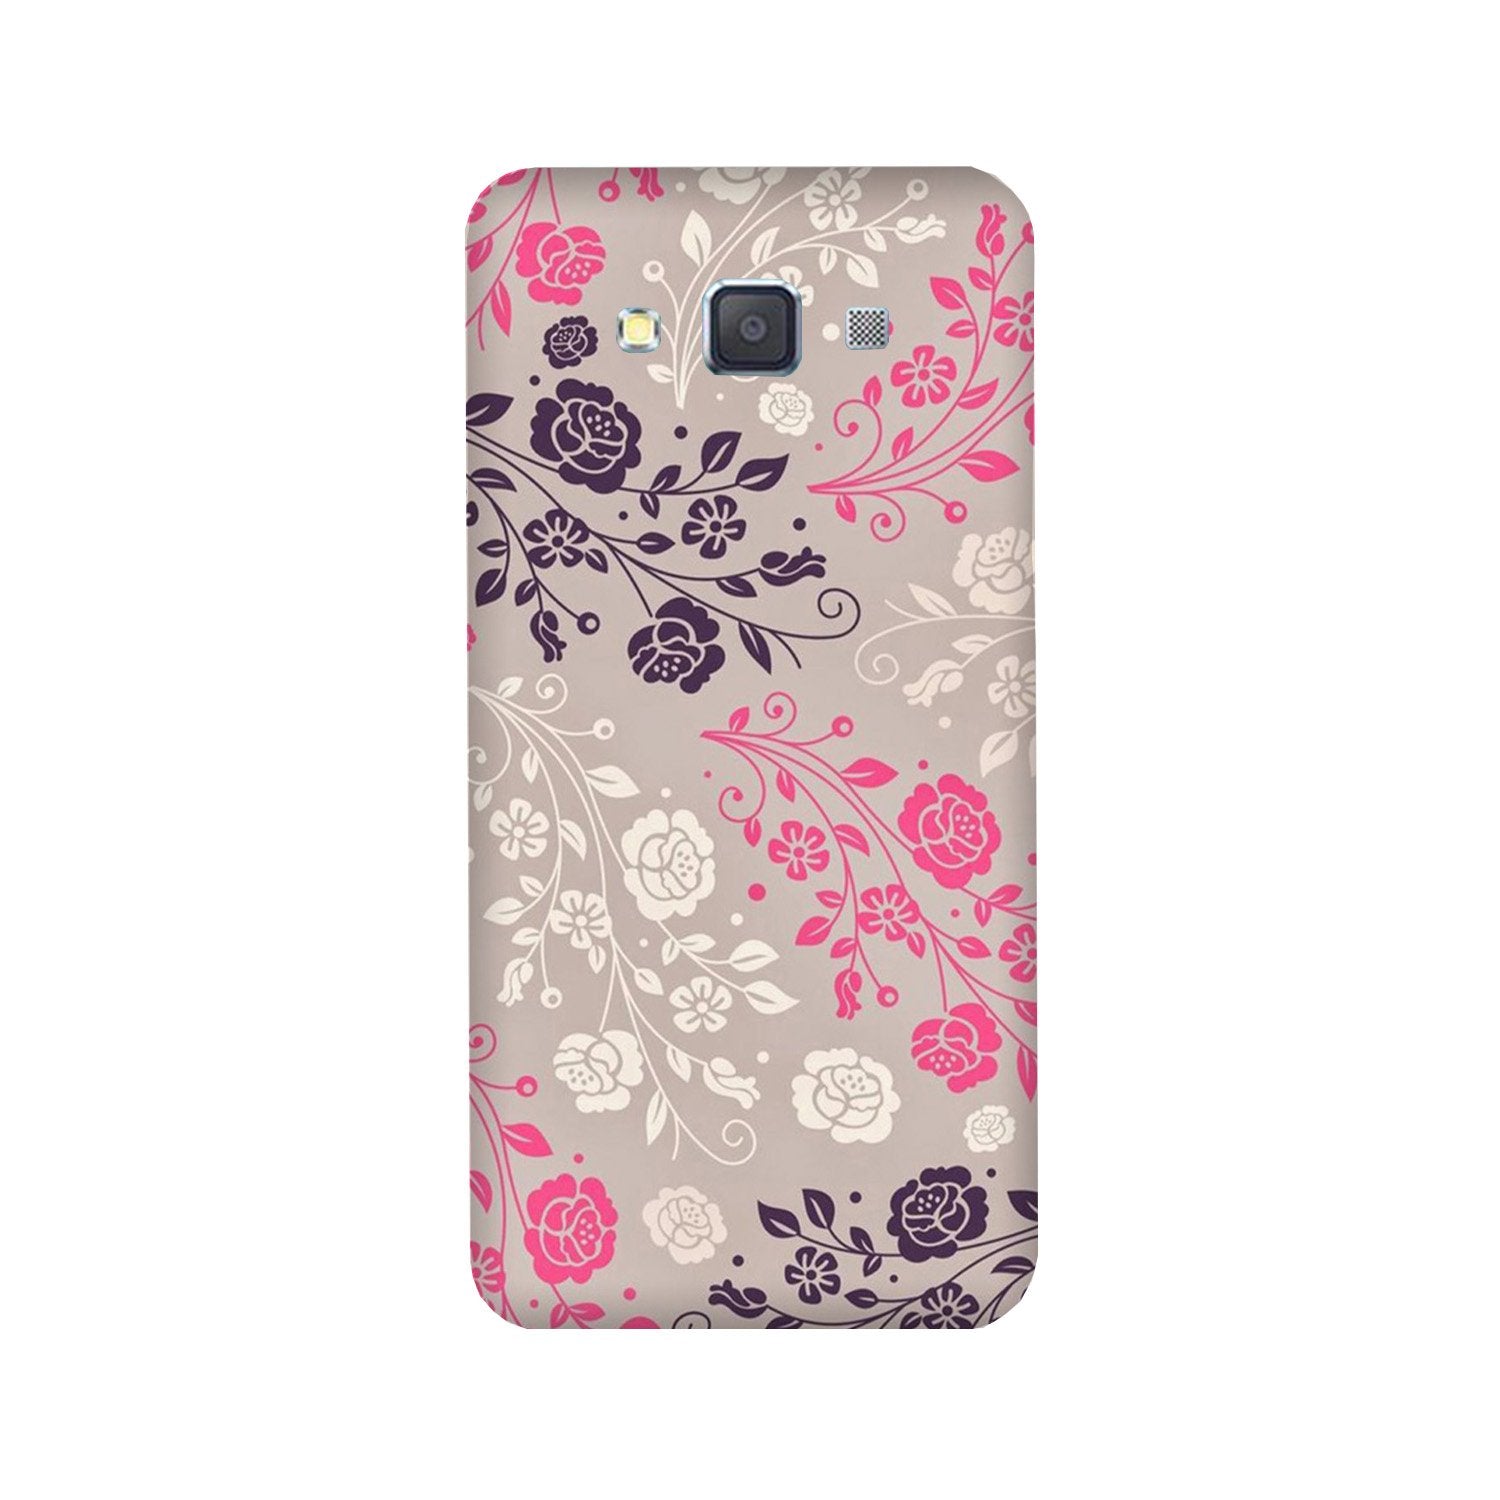 Pattern2 Case for Galaxy Grand 2